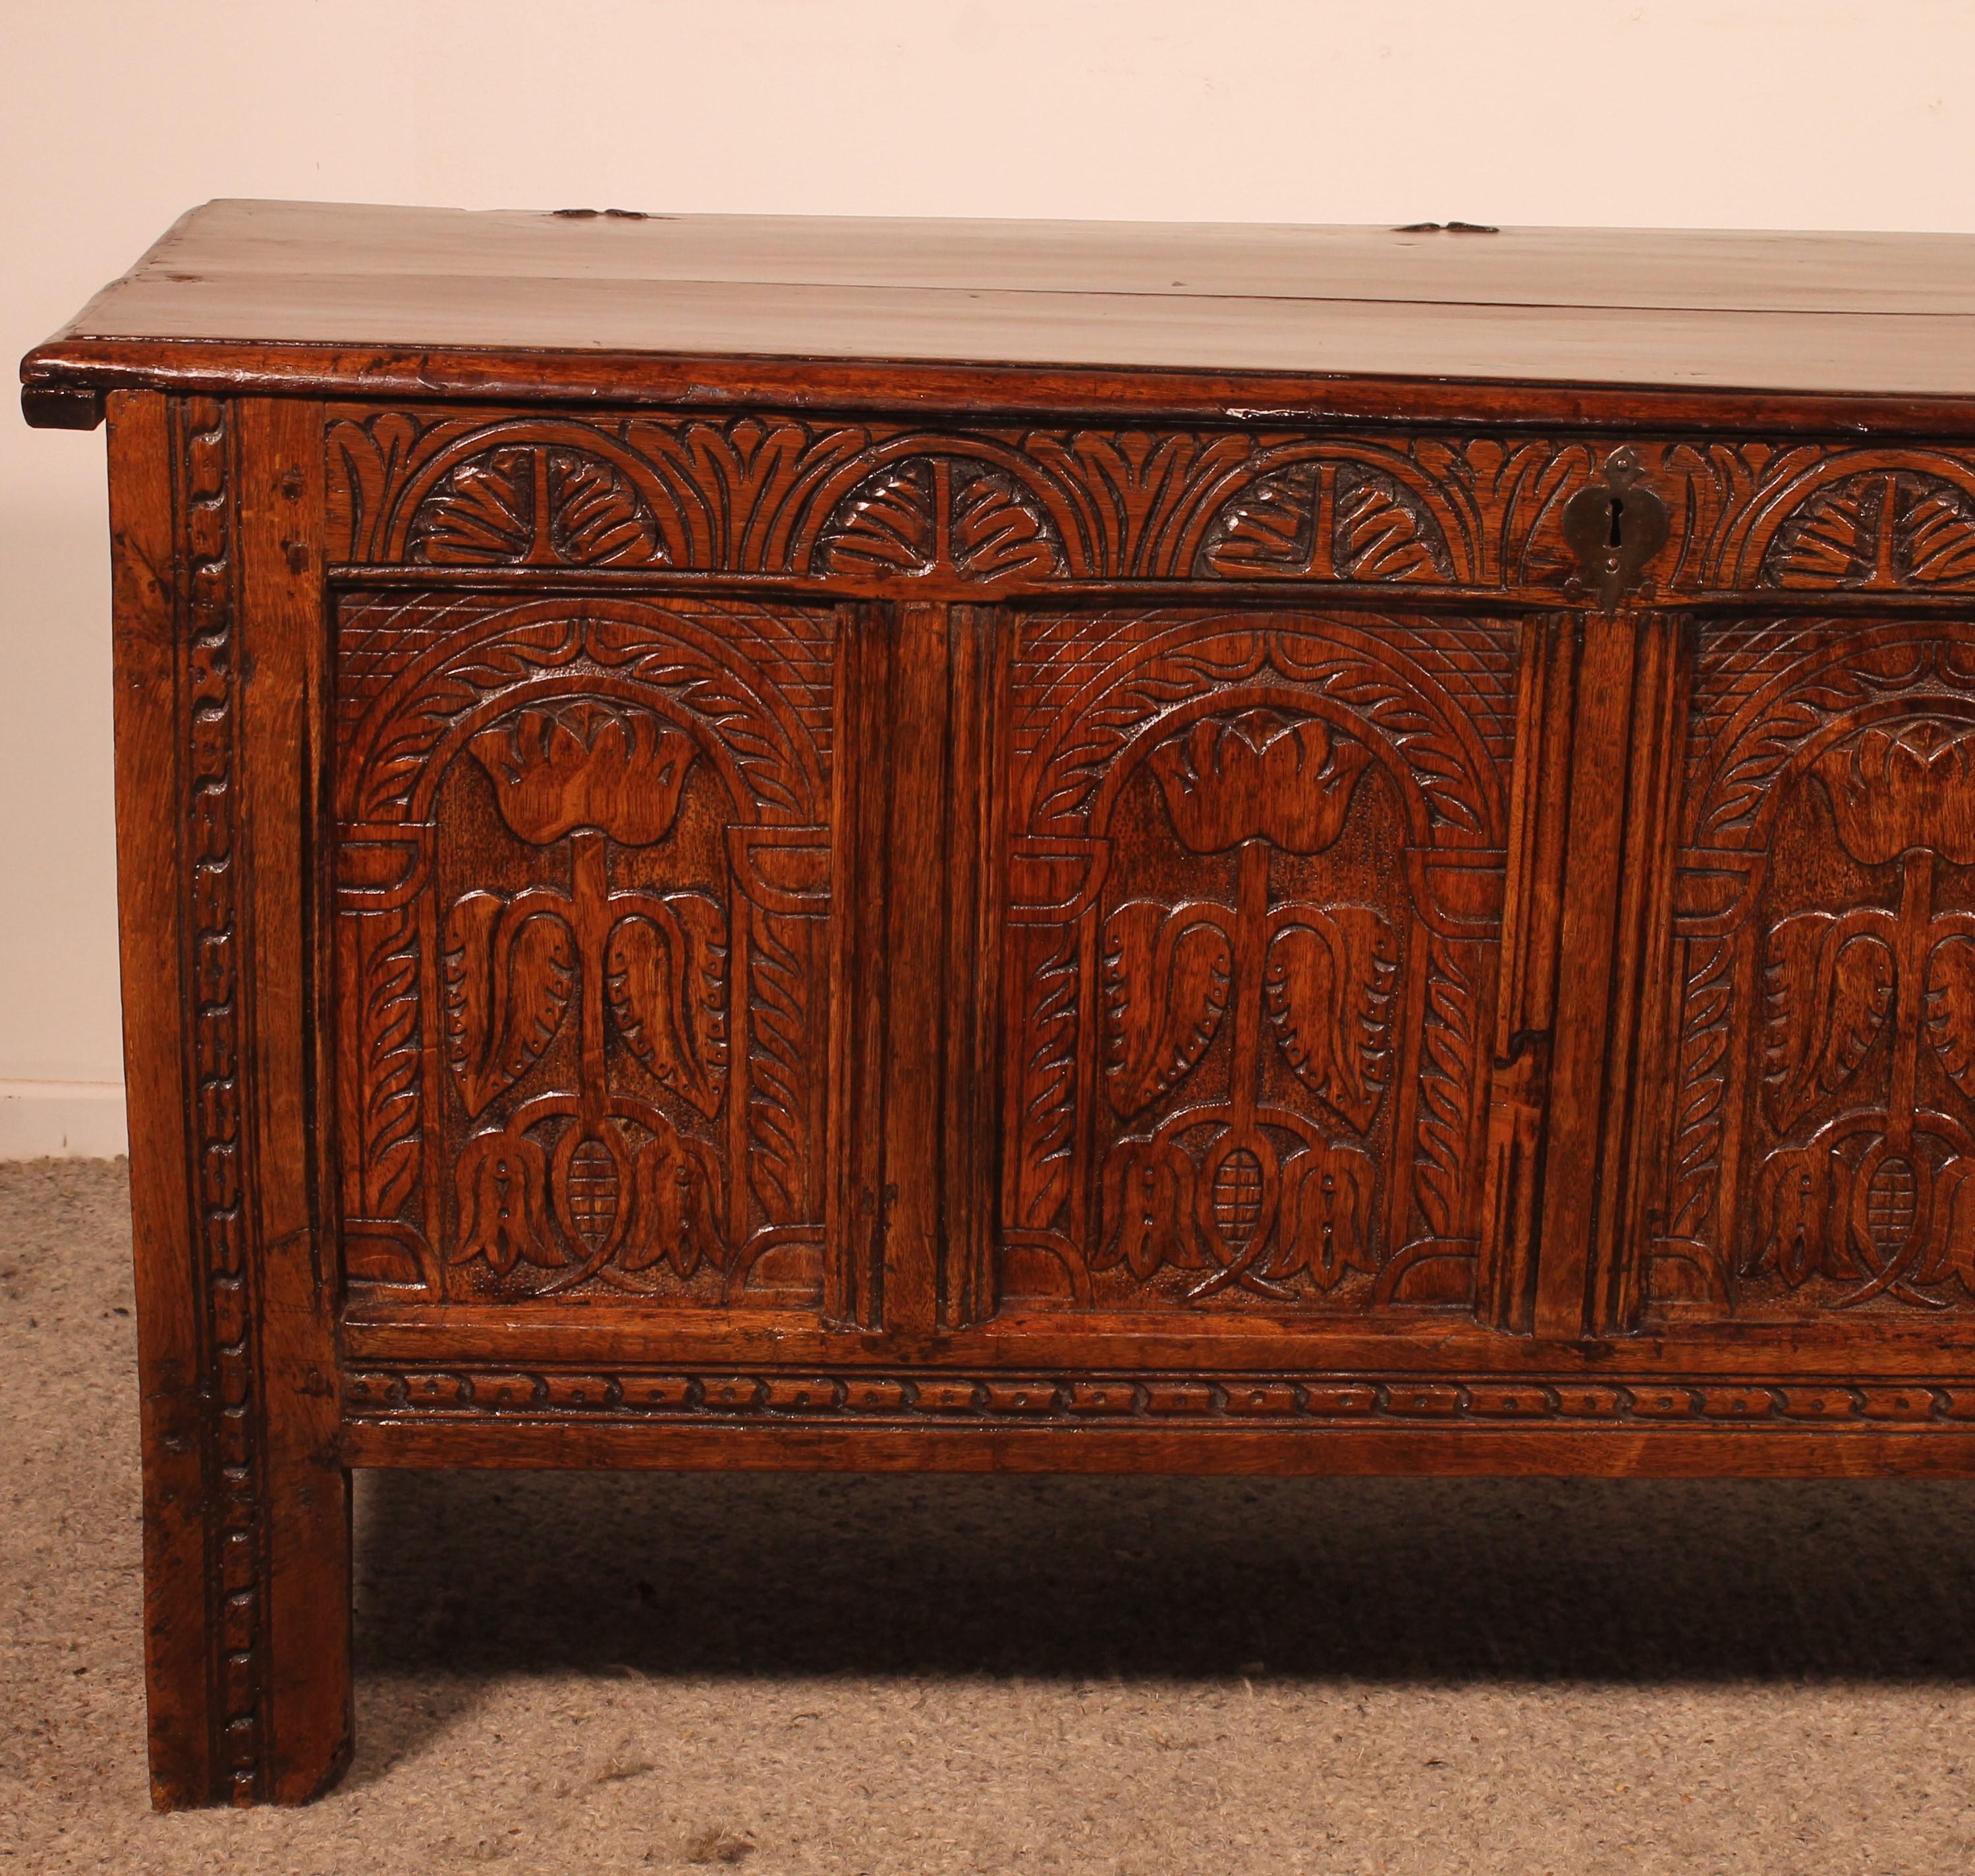 British Oak Chest From 17th Century 4 Panels For Sale